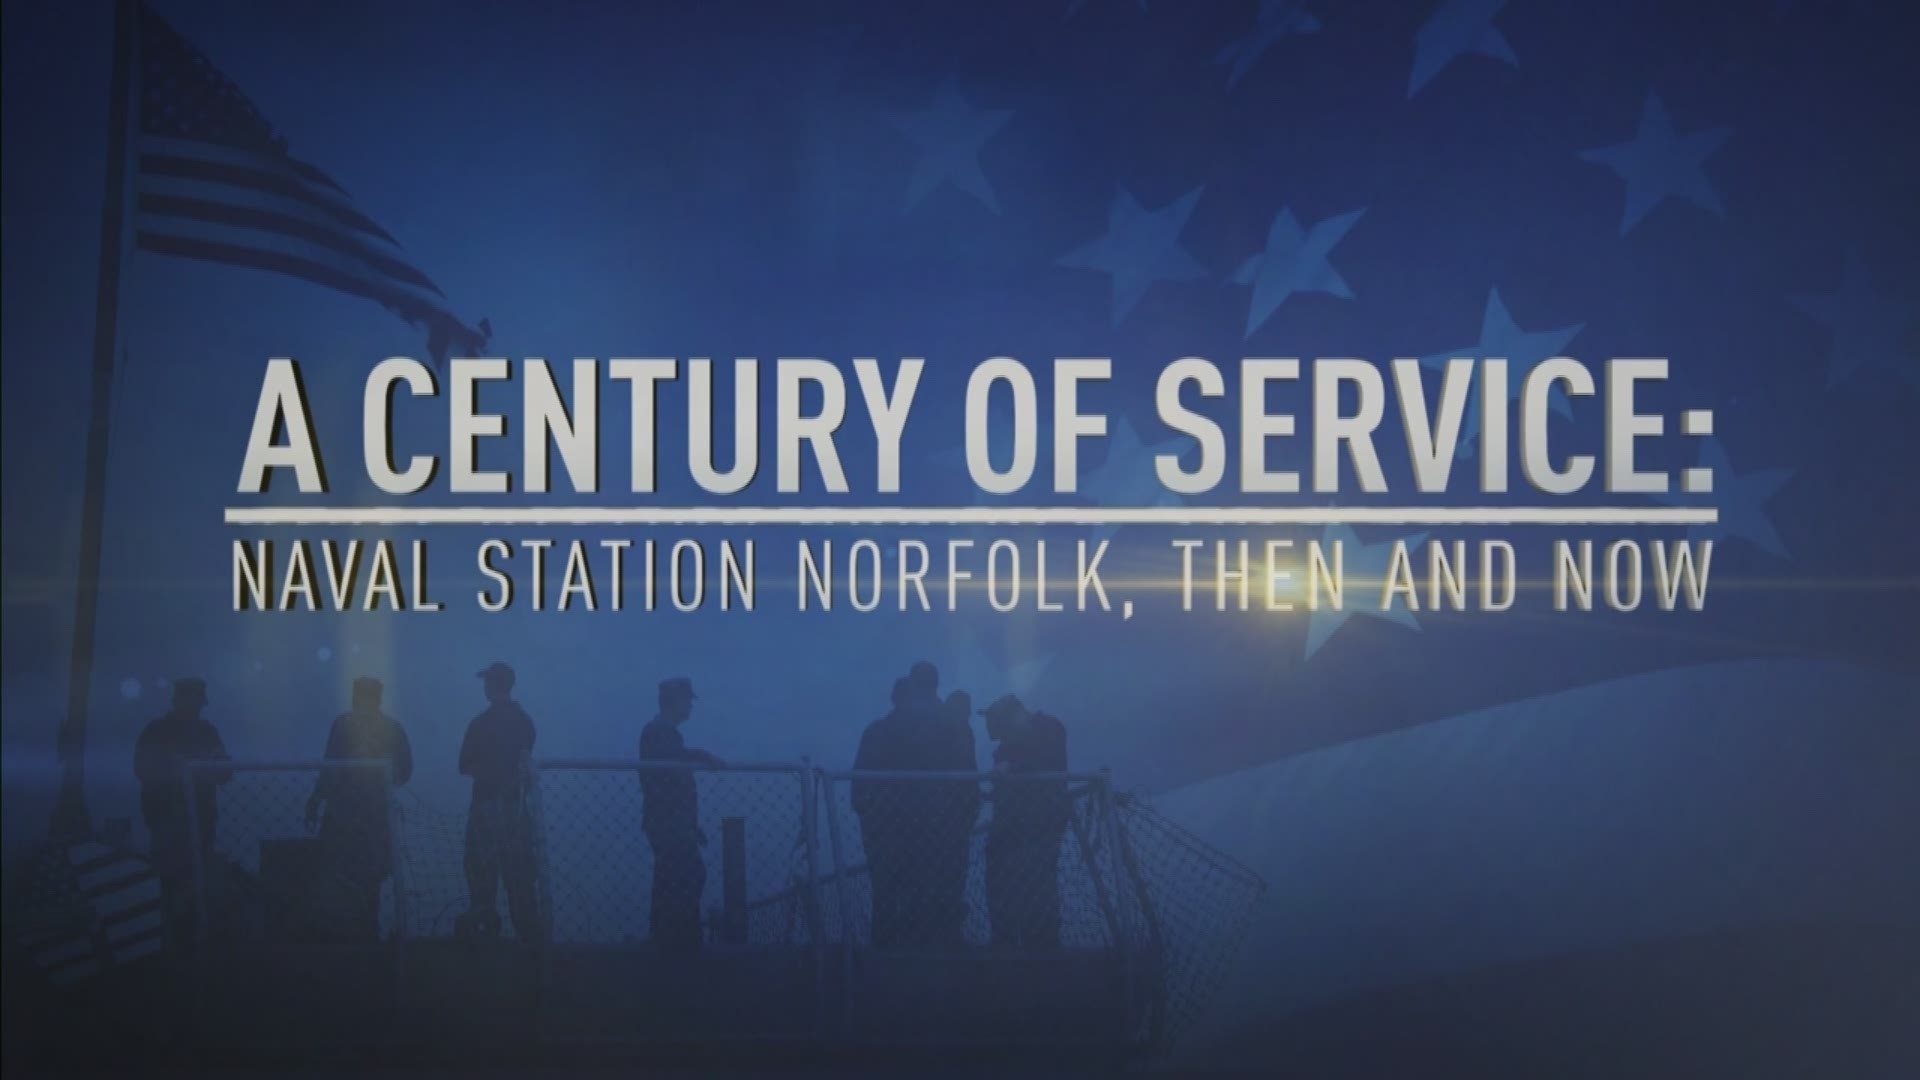 Original air date: 6/28/2017. 13News Now presents: A Century of Service -- Naval Station Norfolk, Then and Now Part 1.